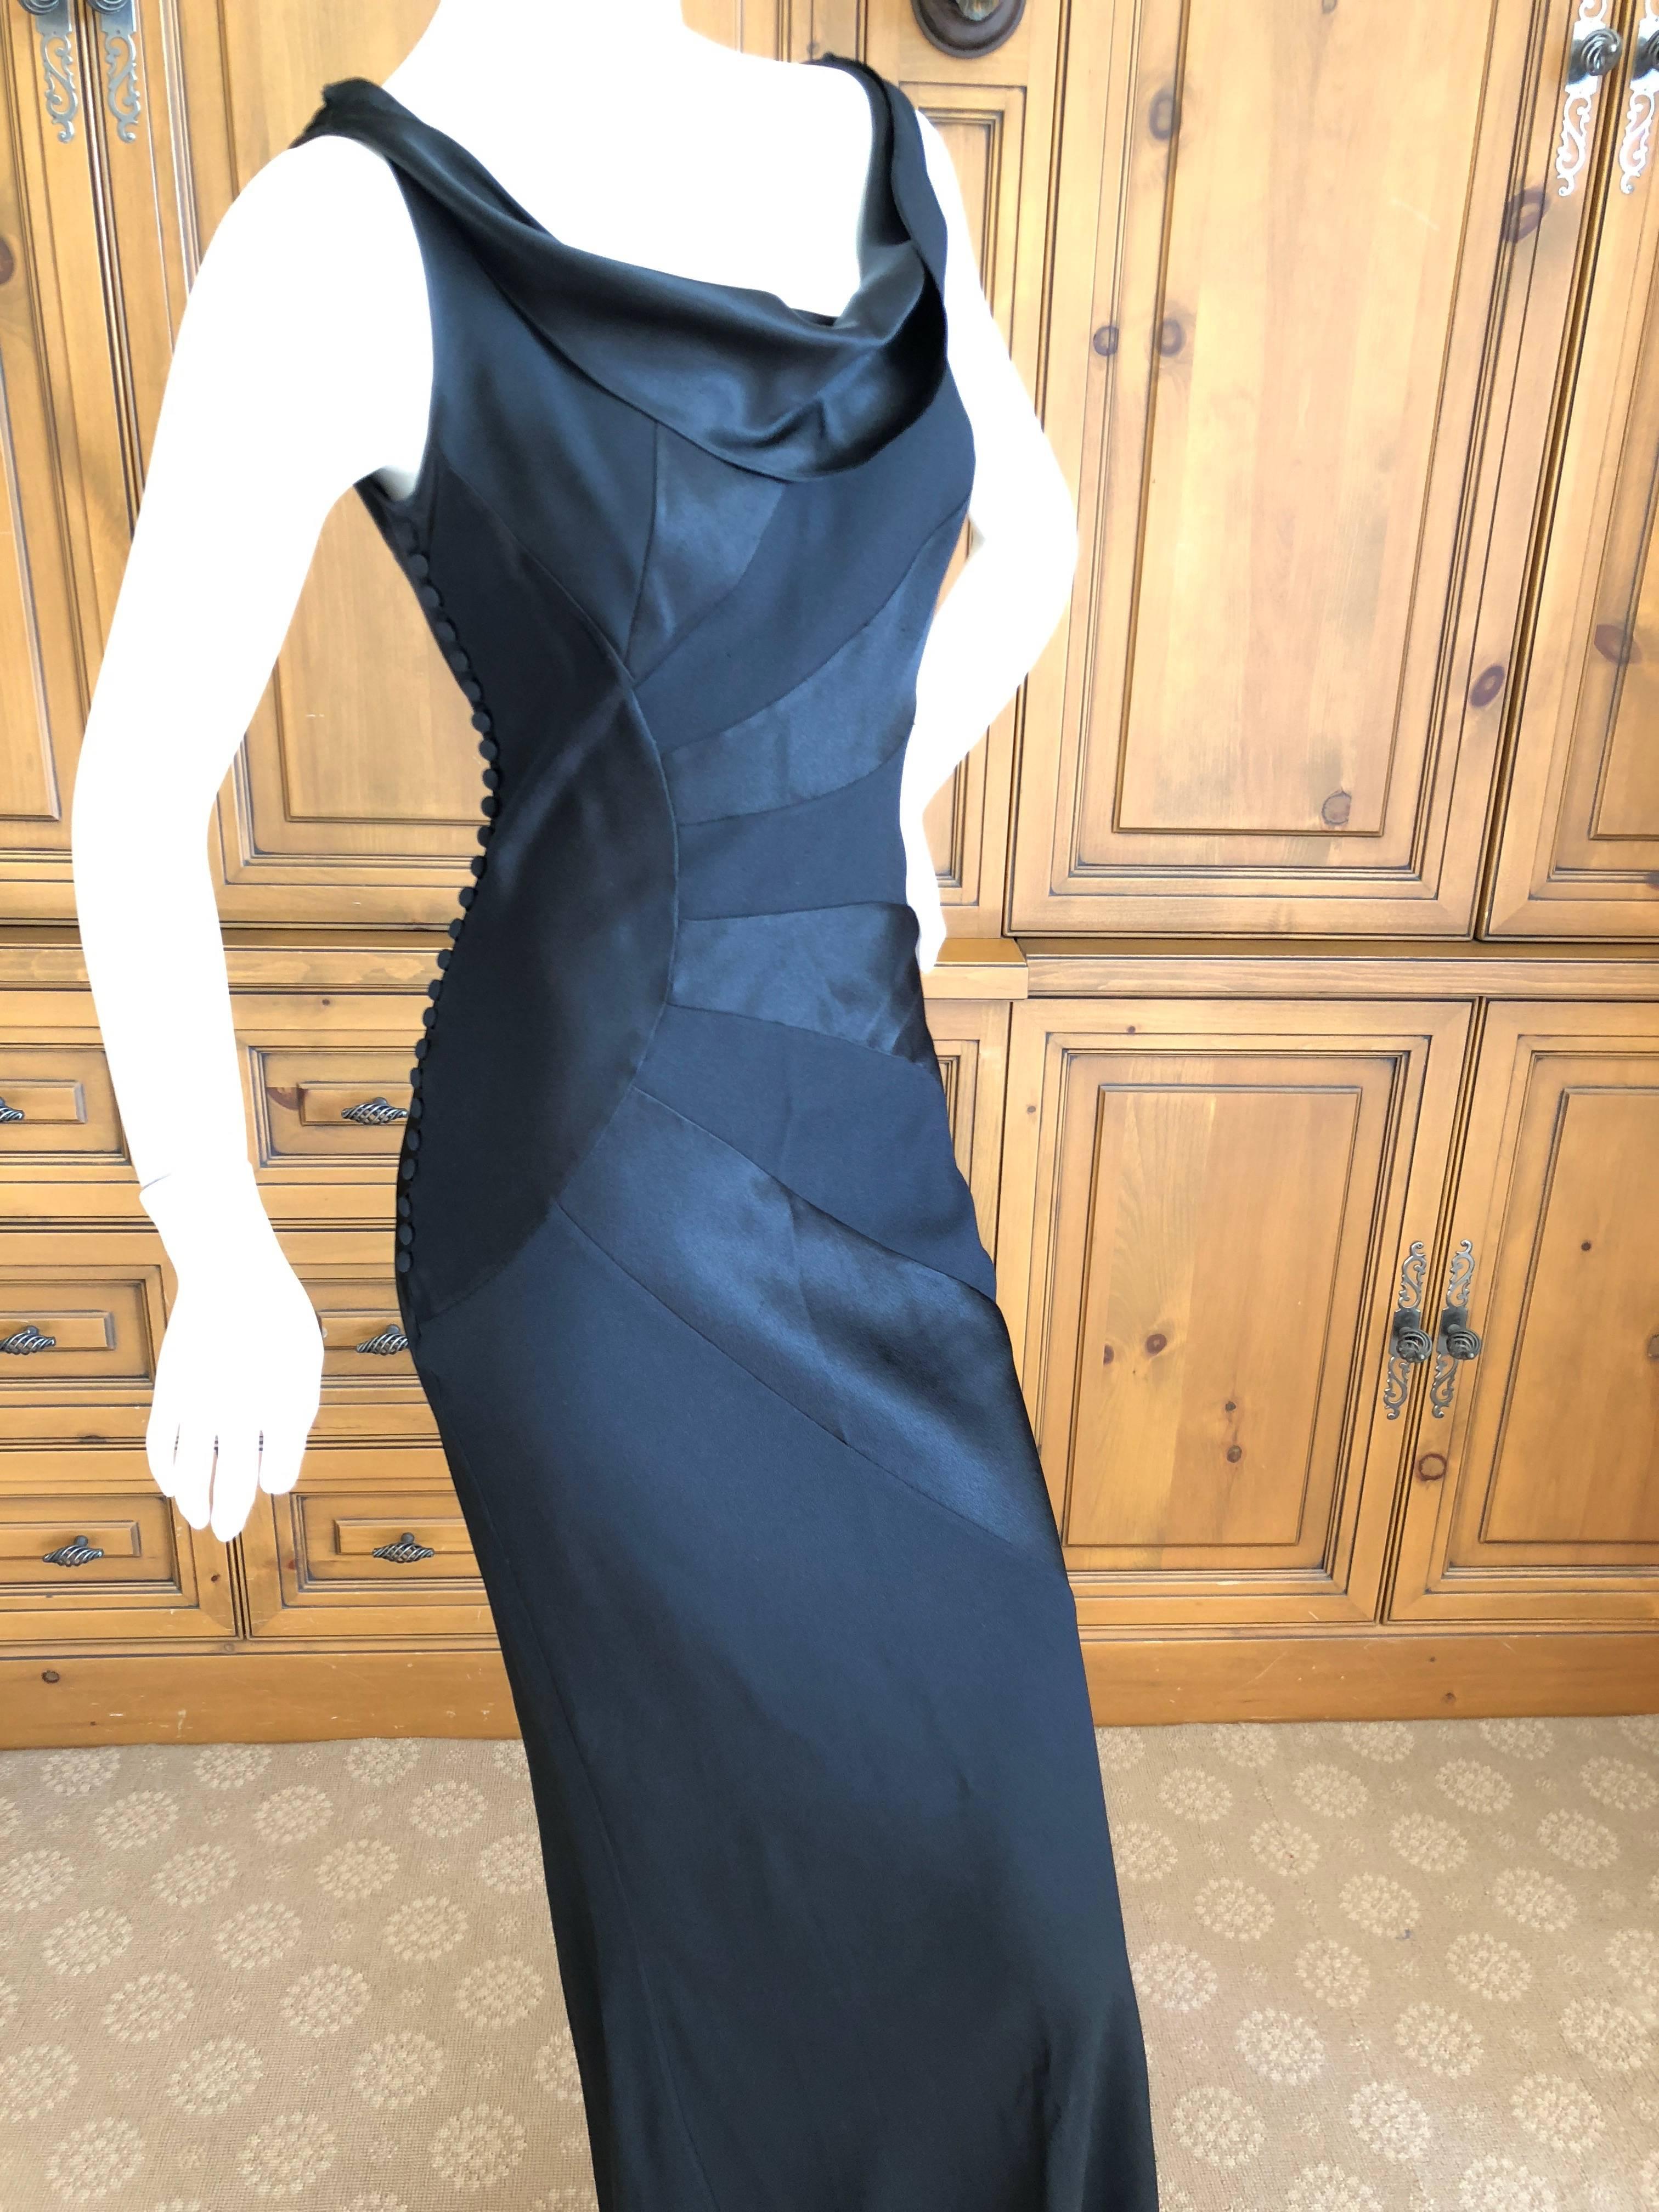 John Galliano Spring 2000 Black Sun Ray Pattern Evening Dress In Excellent Condition For Sale In Cloverdale, CA